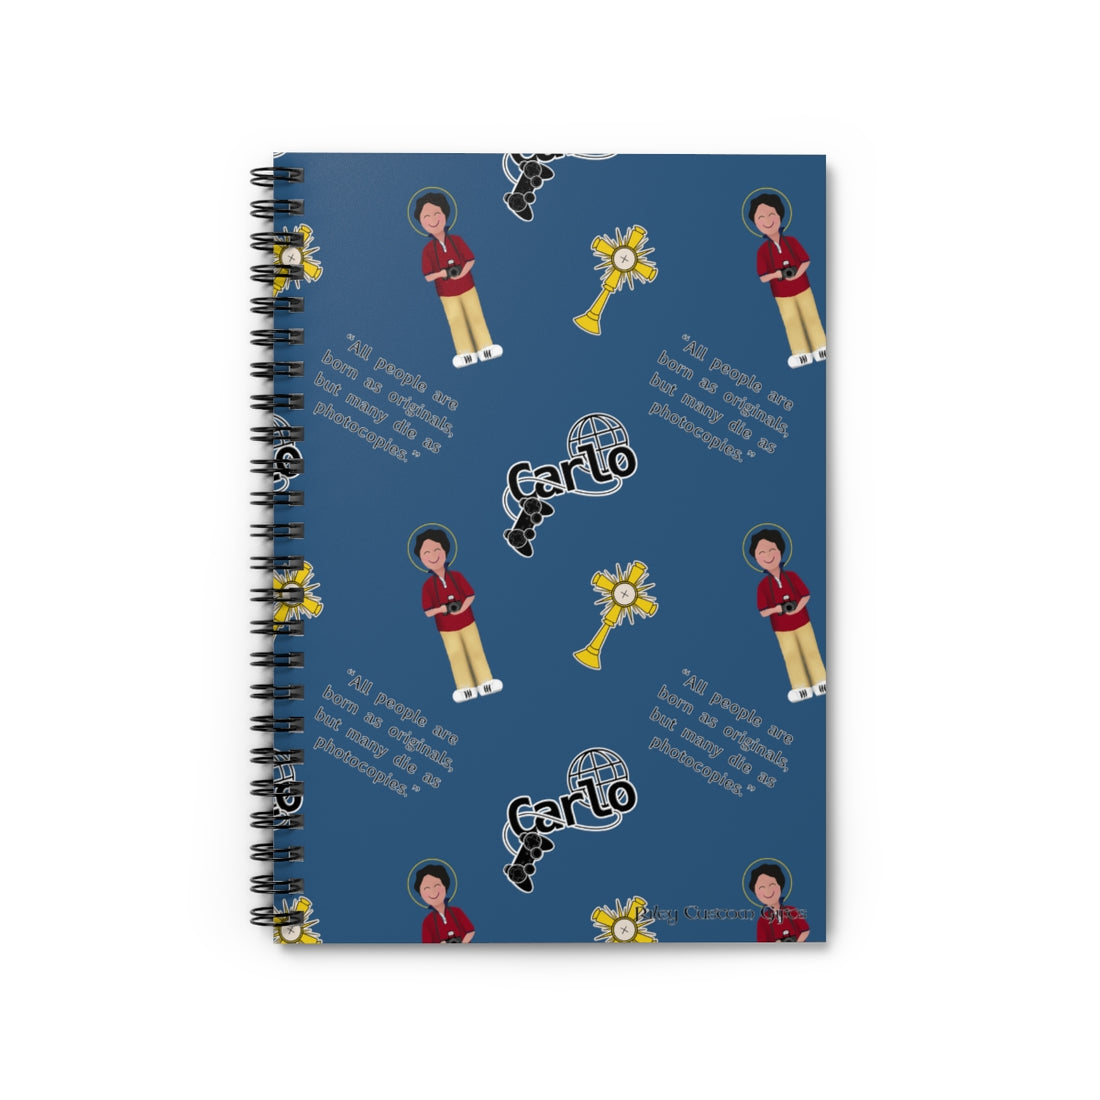 Blessed Carlo Acutis Ruled Spiral Notebook